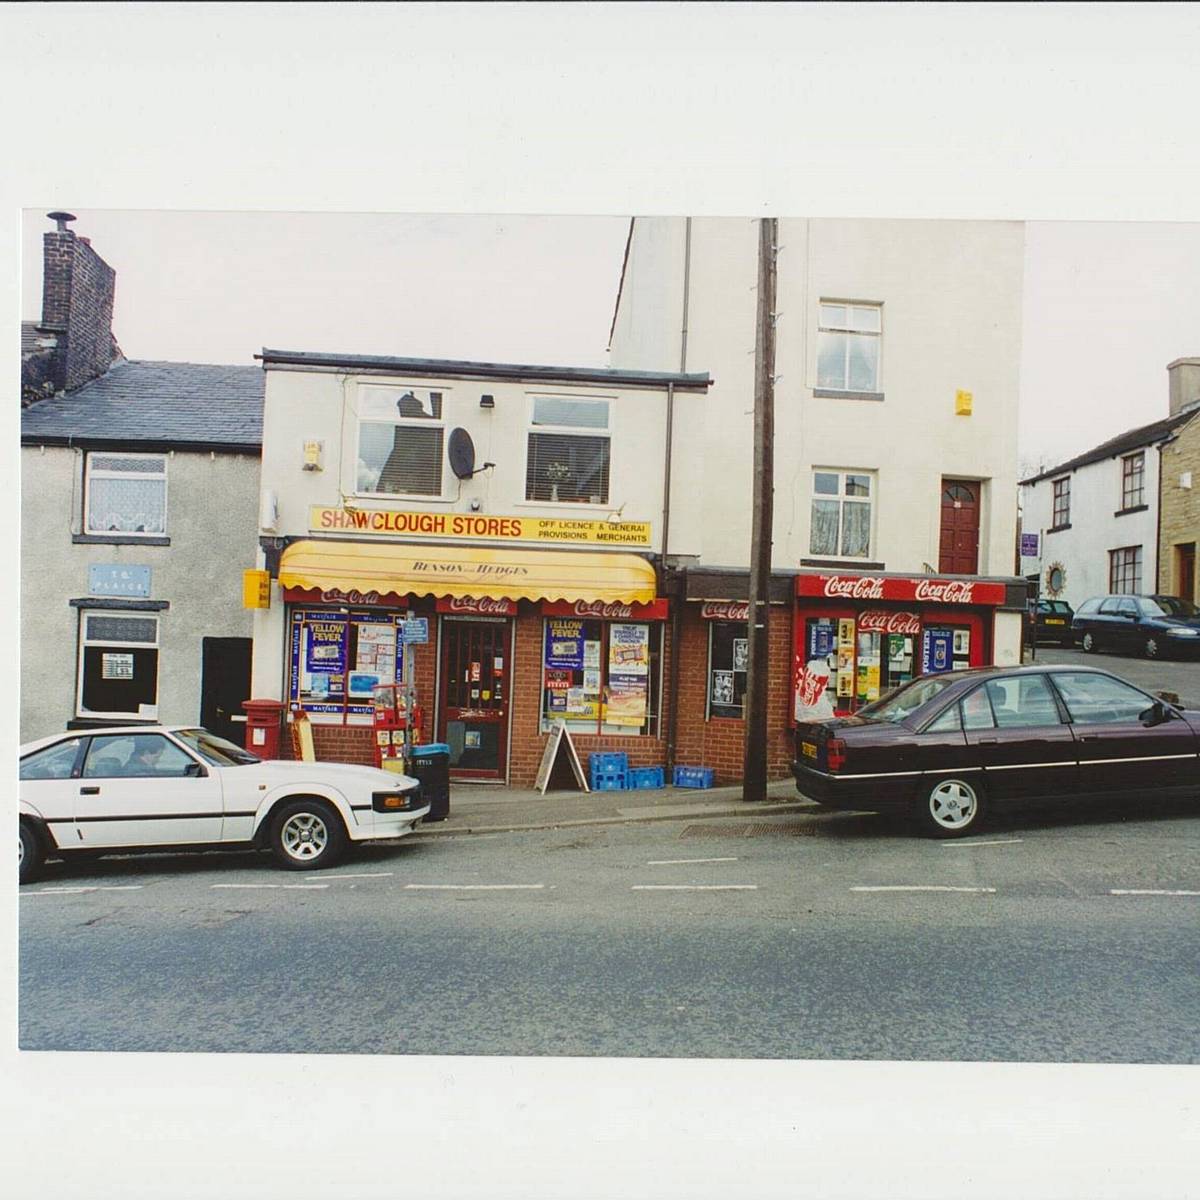 How Shawclough Stores looked in 1991